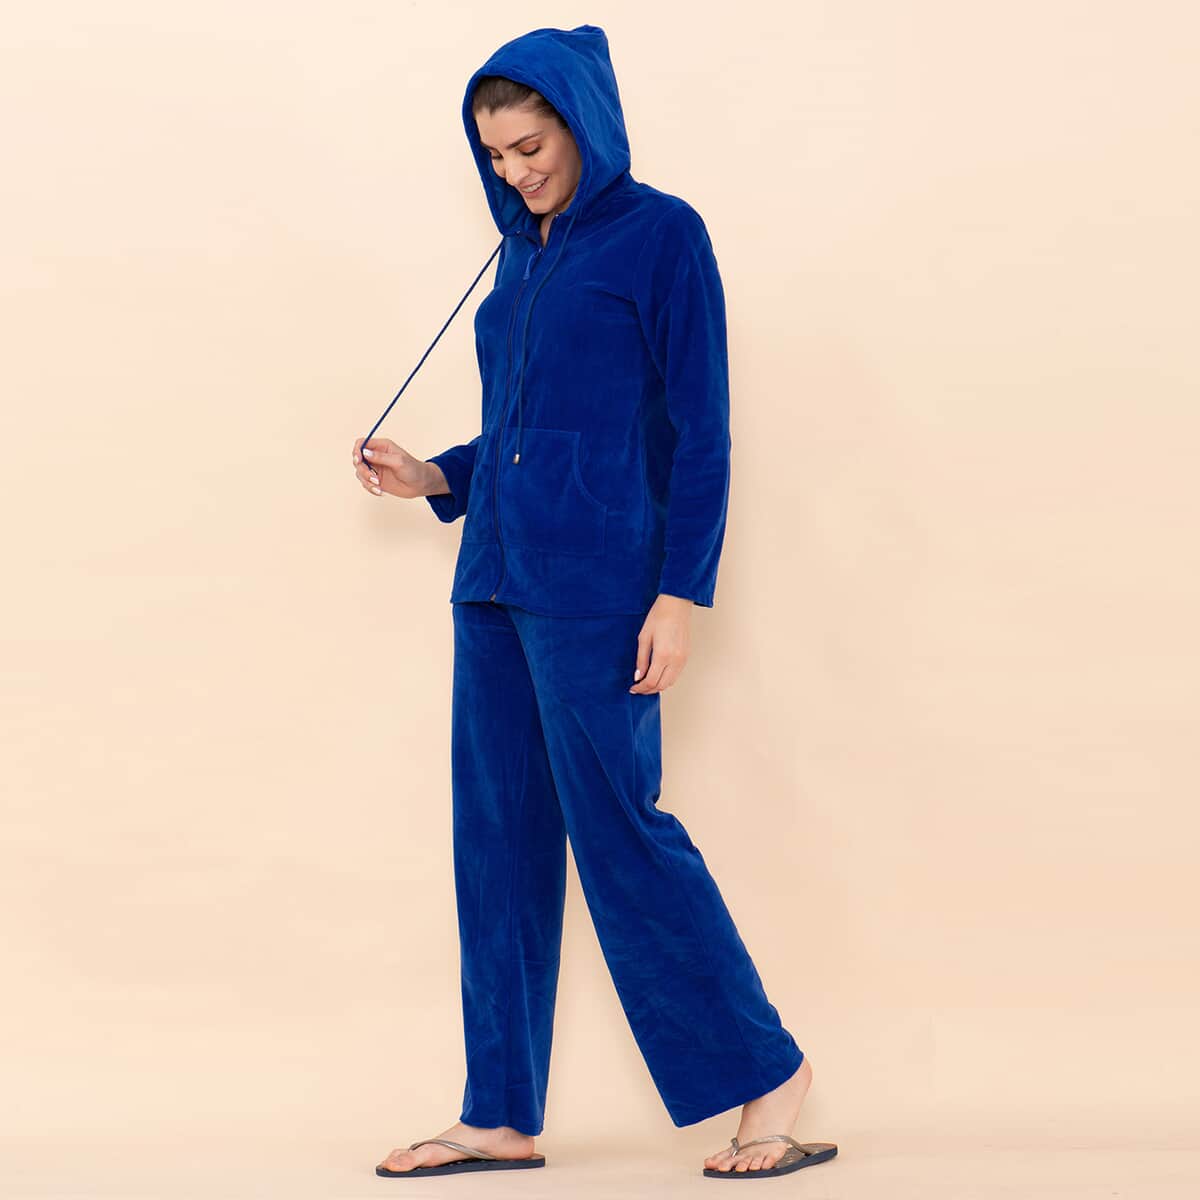 Tamsy LUX Blue Velour Track Suit Set - 1X image number 5